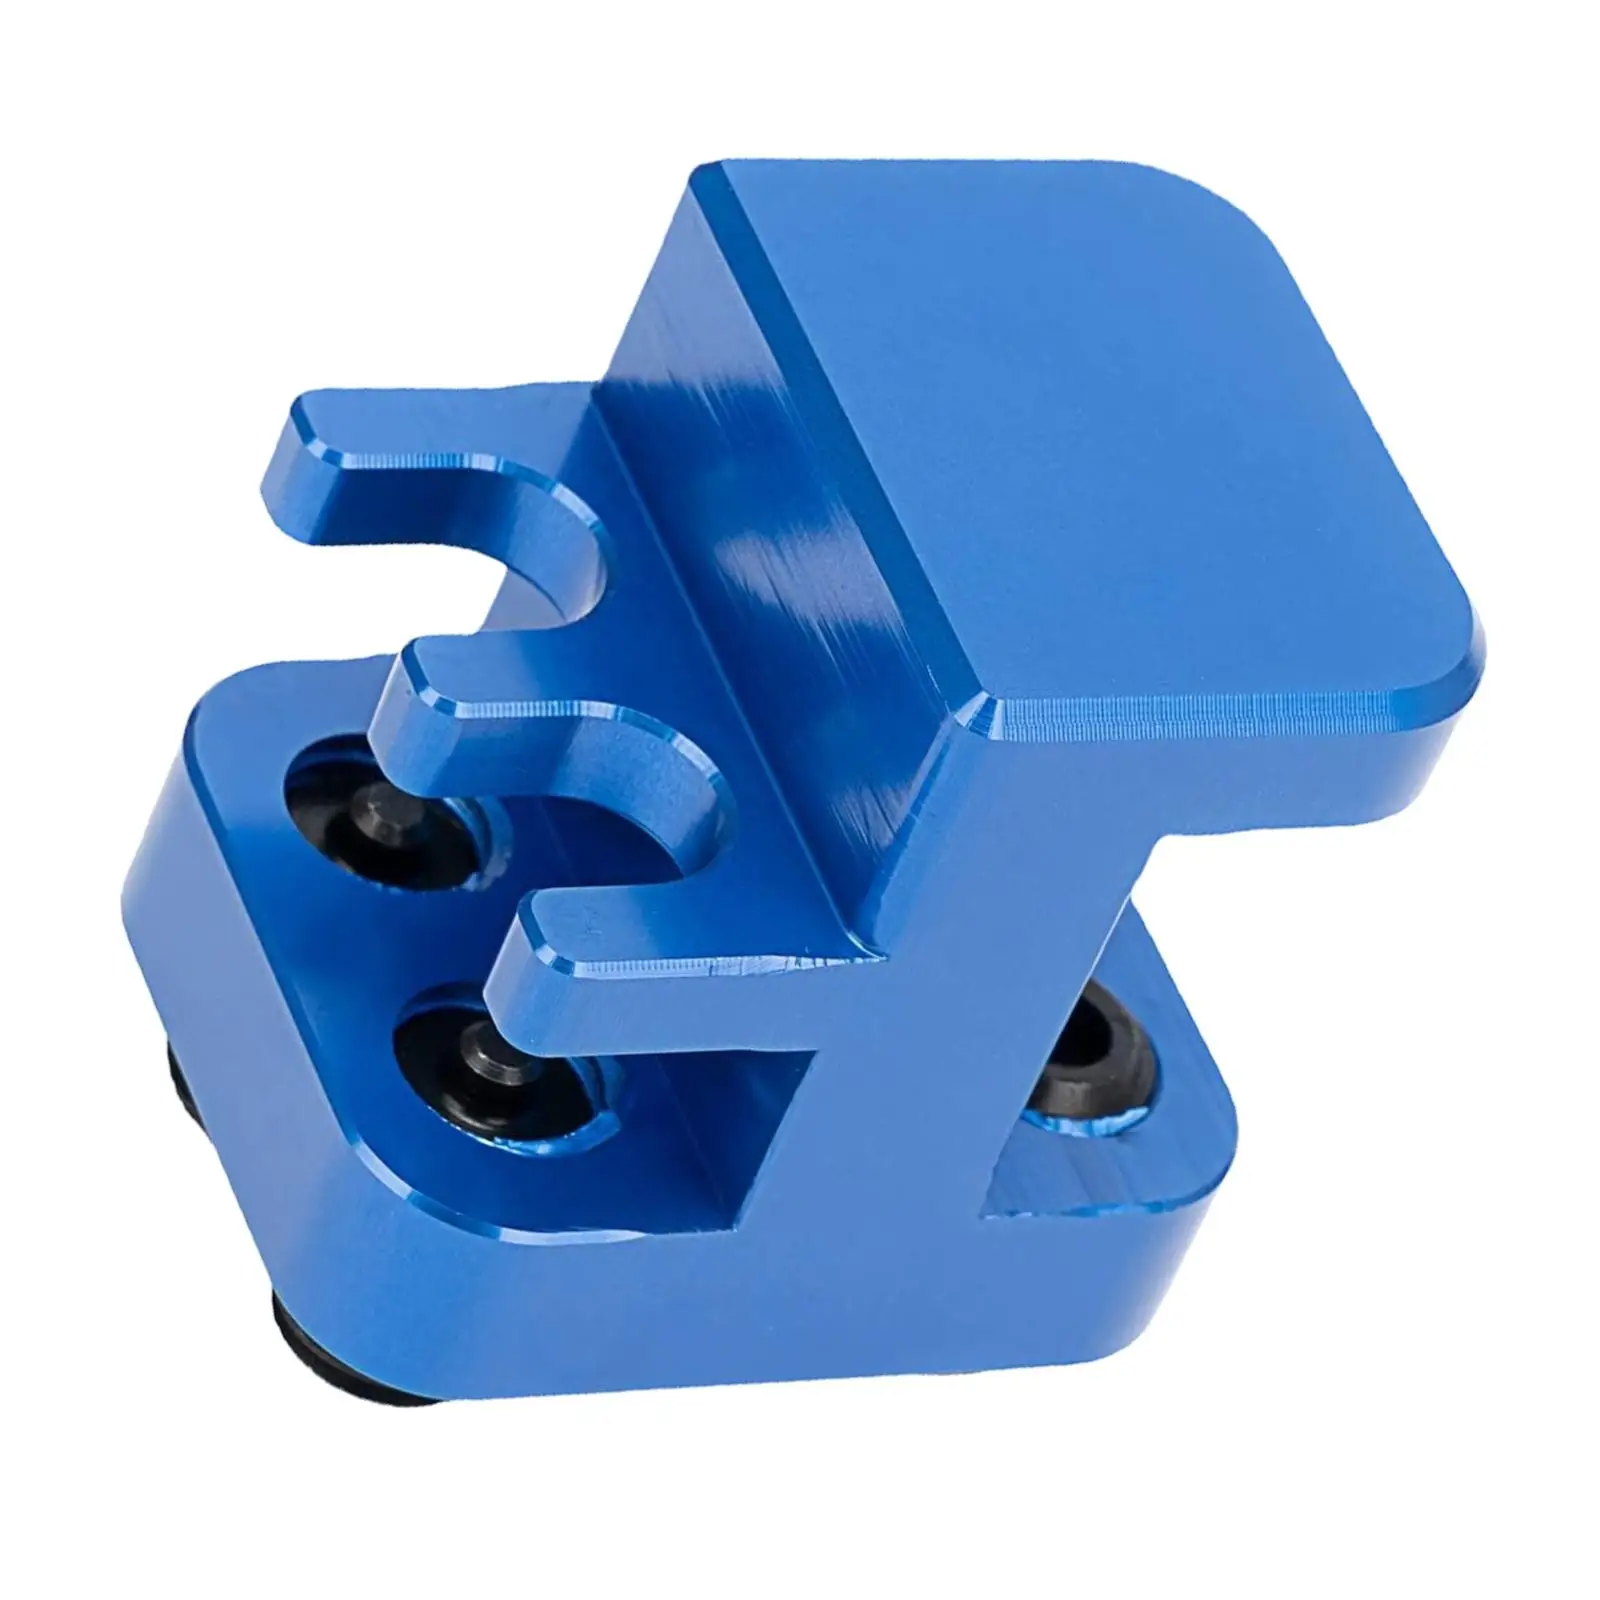 Billet Aluminum Link Press Tool 08-0675O for Most 50 Series Chains 24.8mm Max Width Chains Accessories Parts Blue